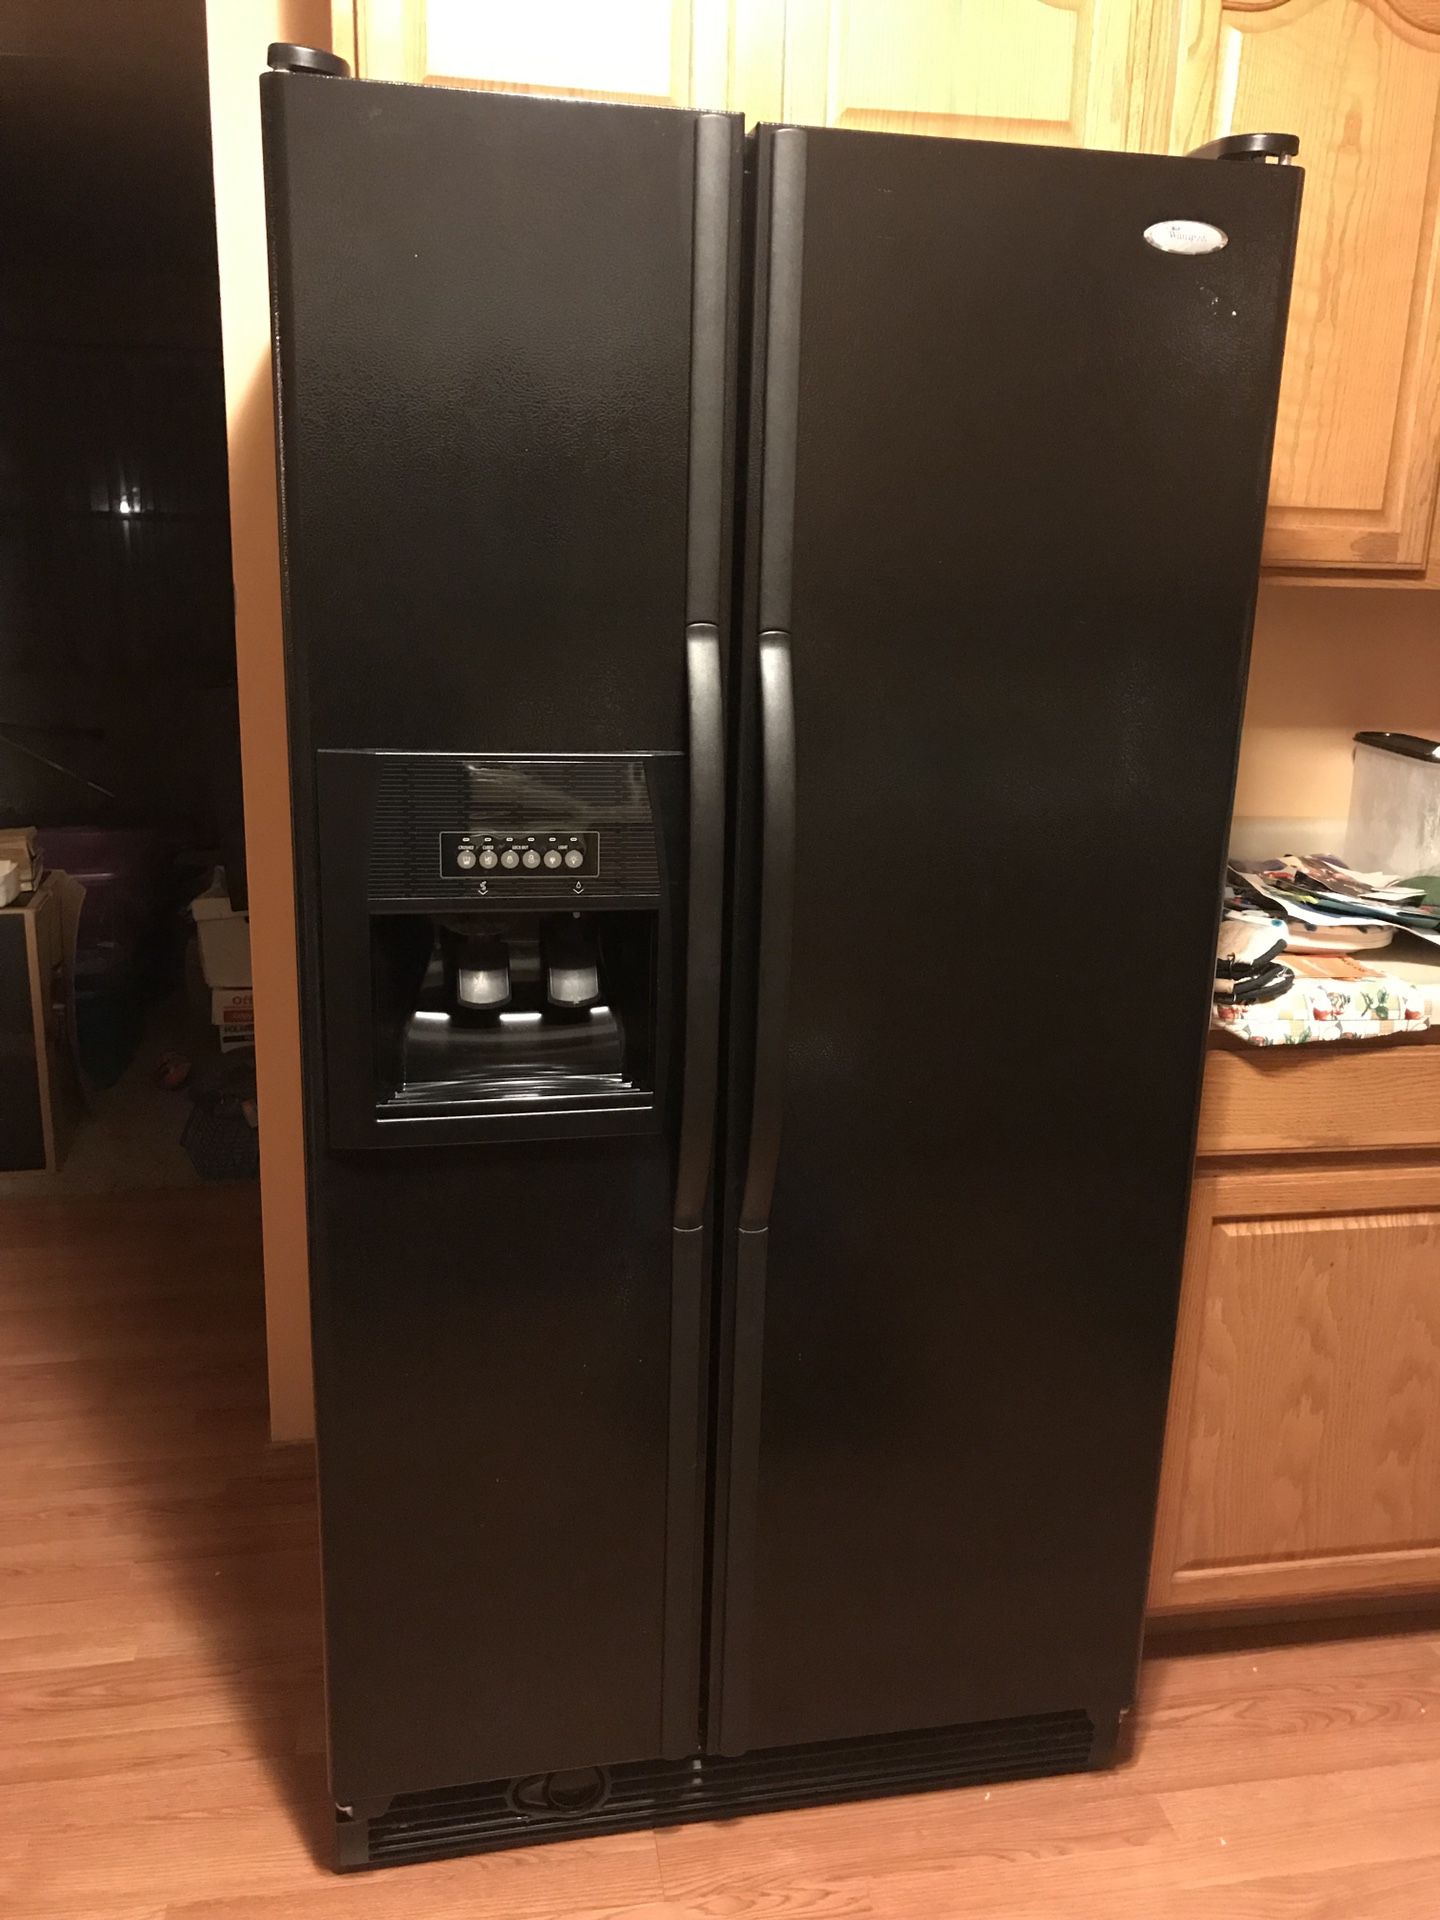 Refrigerator and washer both whirlpool brand new 350 or best offer